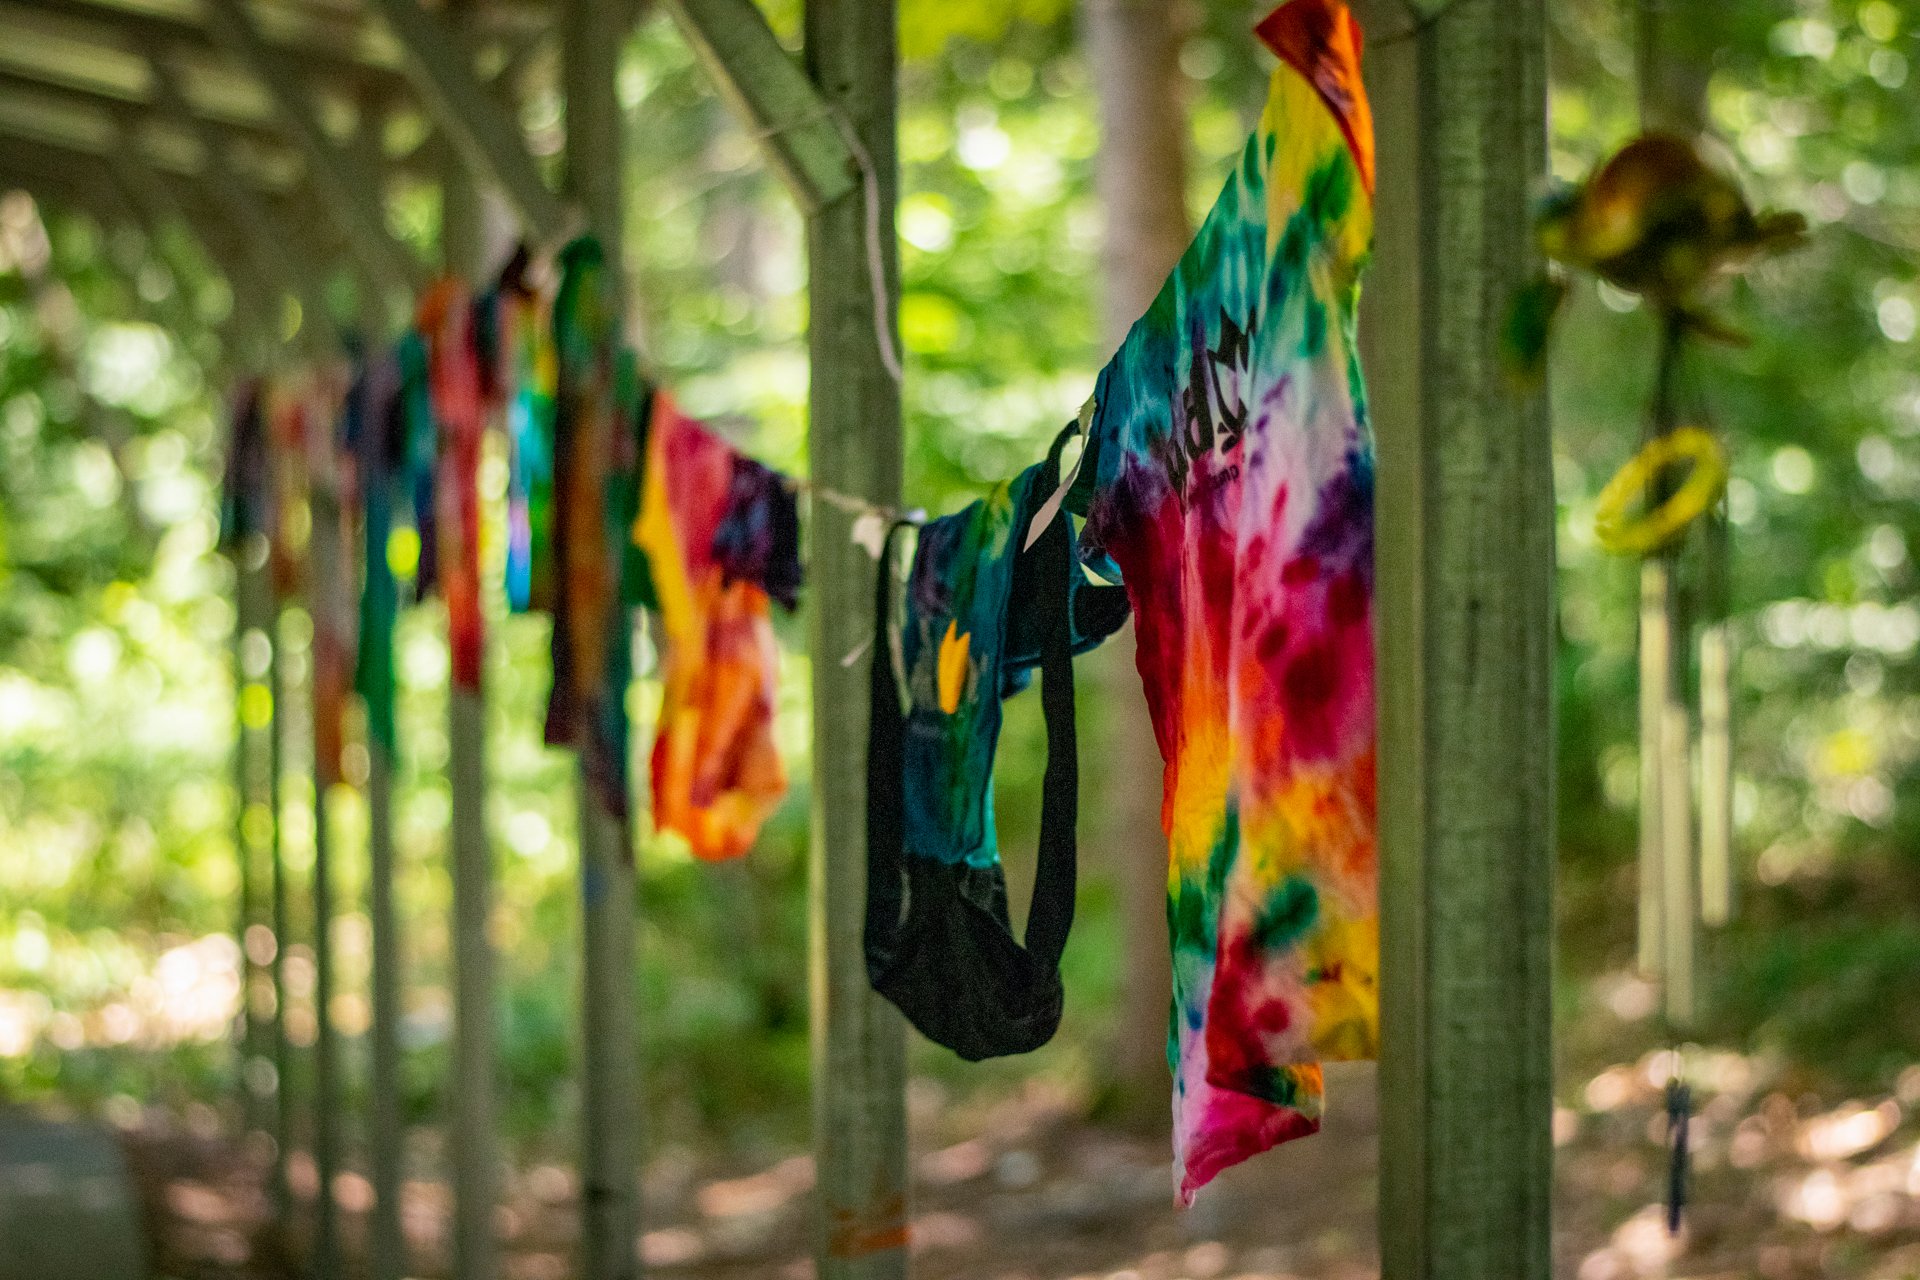 A variety of freshly tie-dyed shirts hang drying on a clothesline strung between wooden posts at Wildwood's Arts & Crafts pavilion